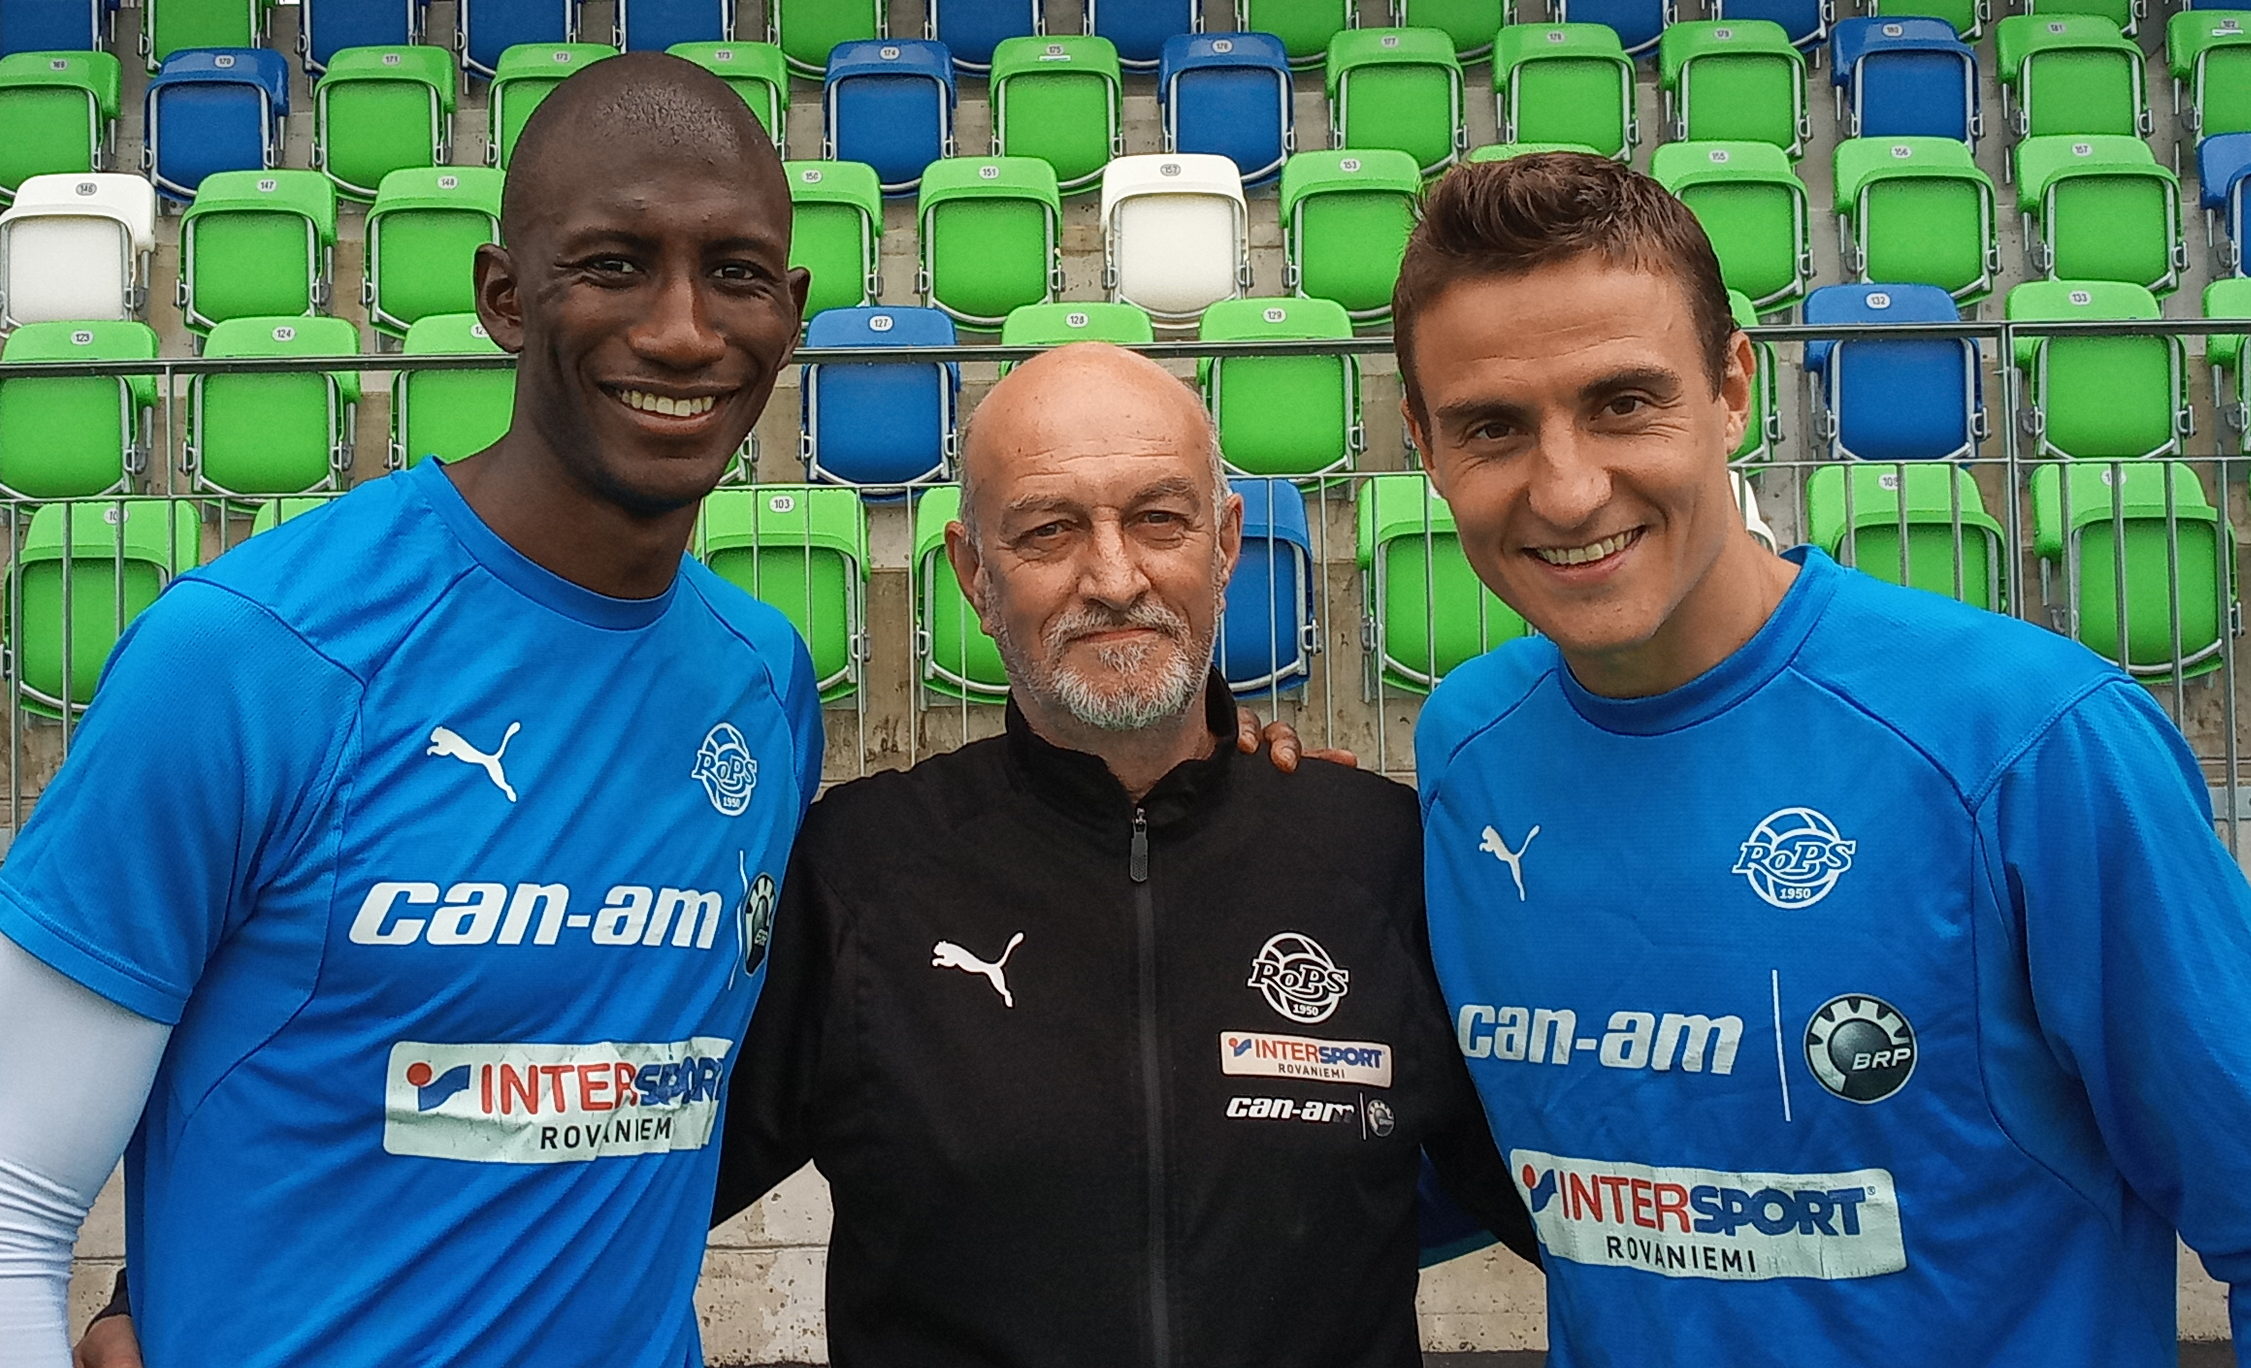 David Coull flanked by Mahamadou Sissoko (left) and Antonio Reguero